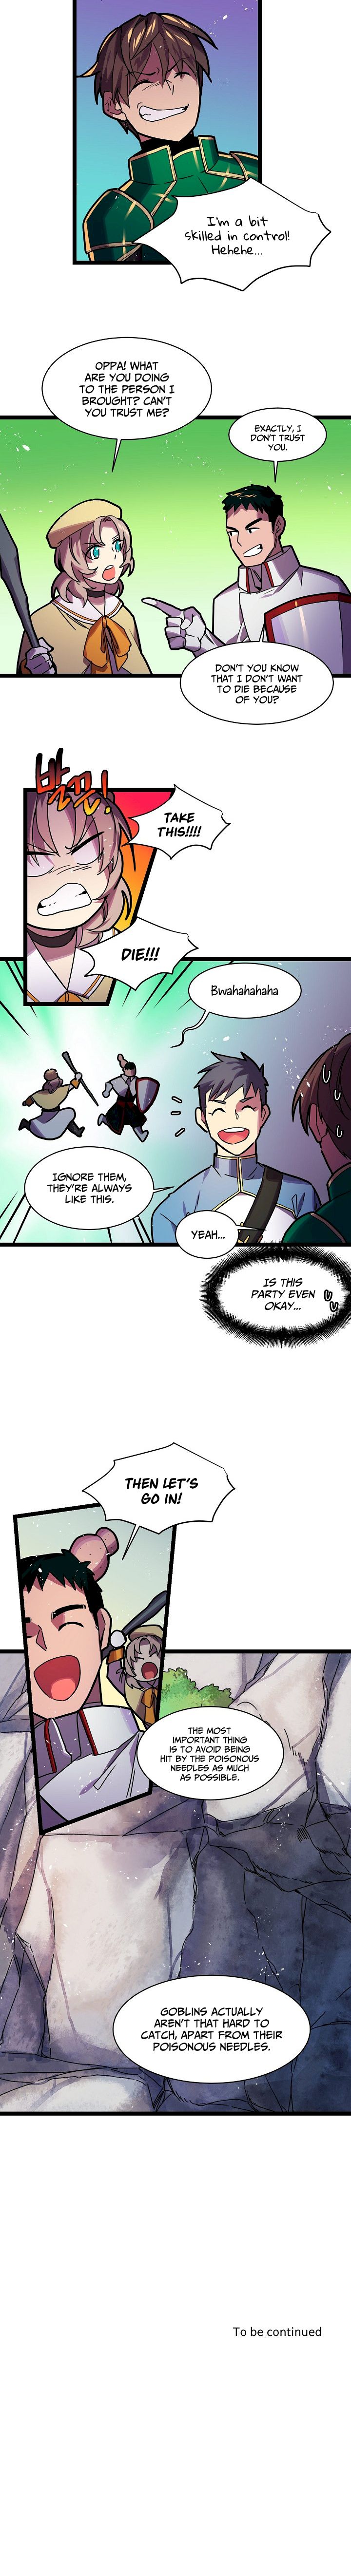 Ranker's Return - Chapter 9 Page 7